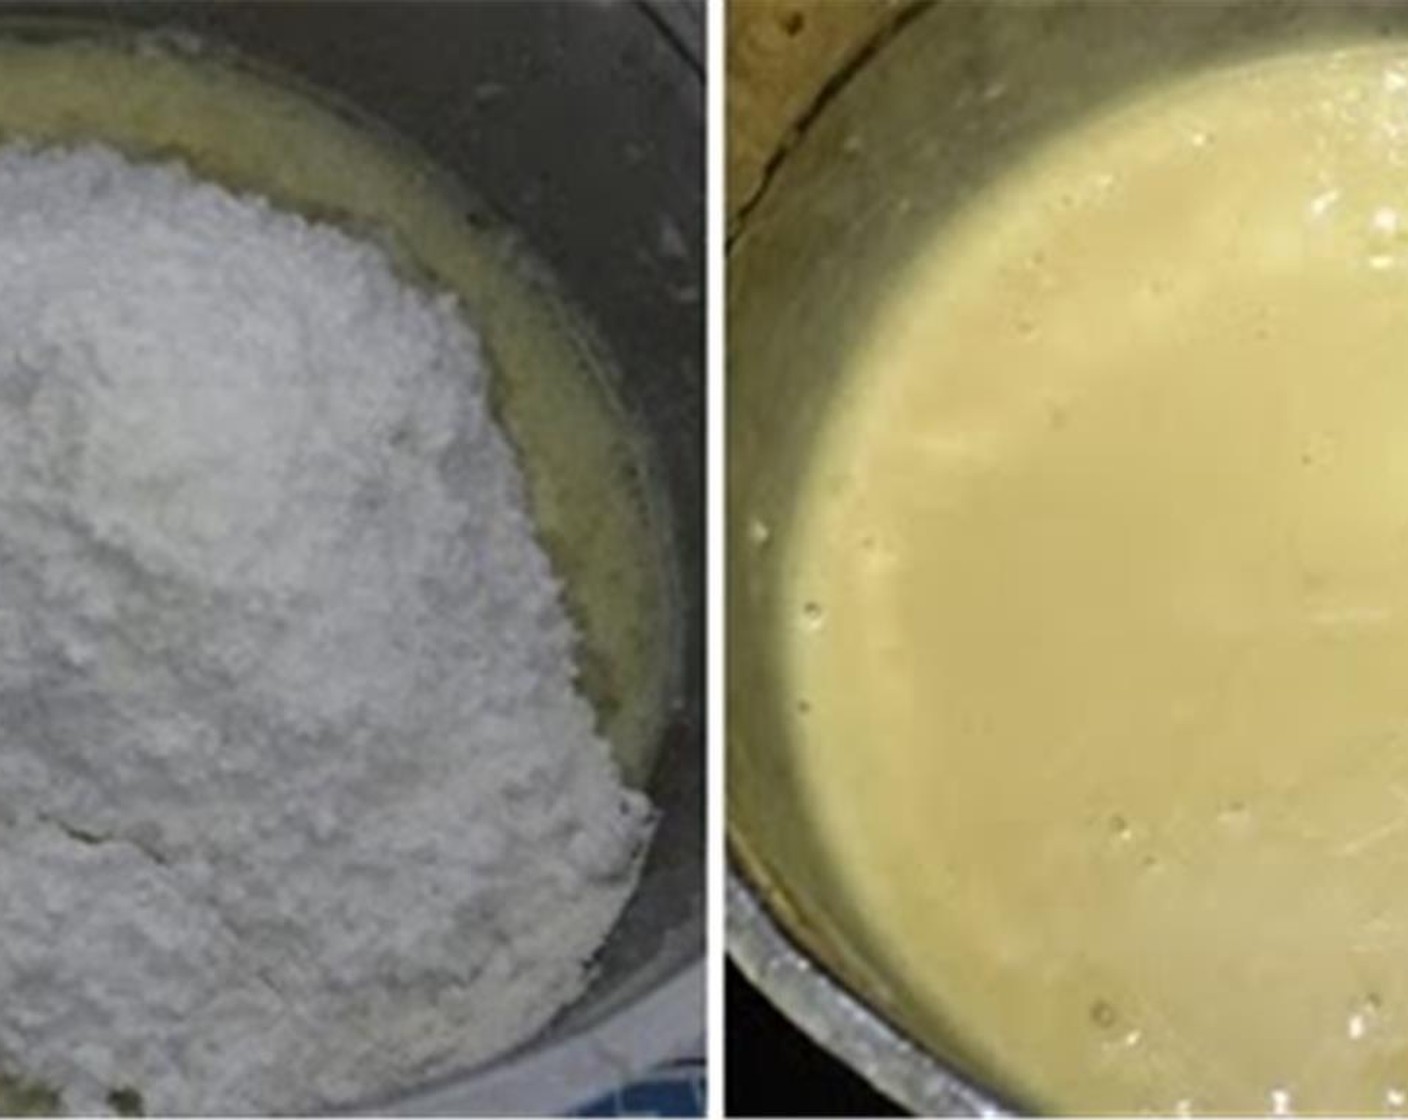 step 4 Sift in All-Purpose Flour (1 cup), Baking Powder (1/2 tsp), Baking Soda (1/4 tsp), and Salt (1 pinch). Mix together until you have a smooth batter.